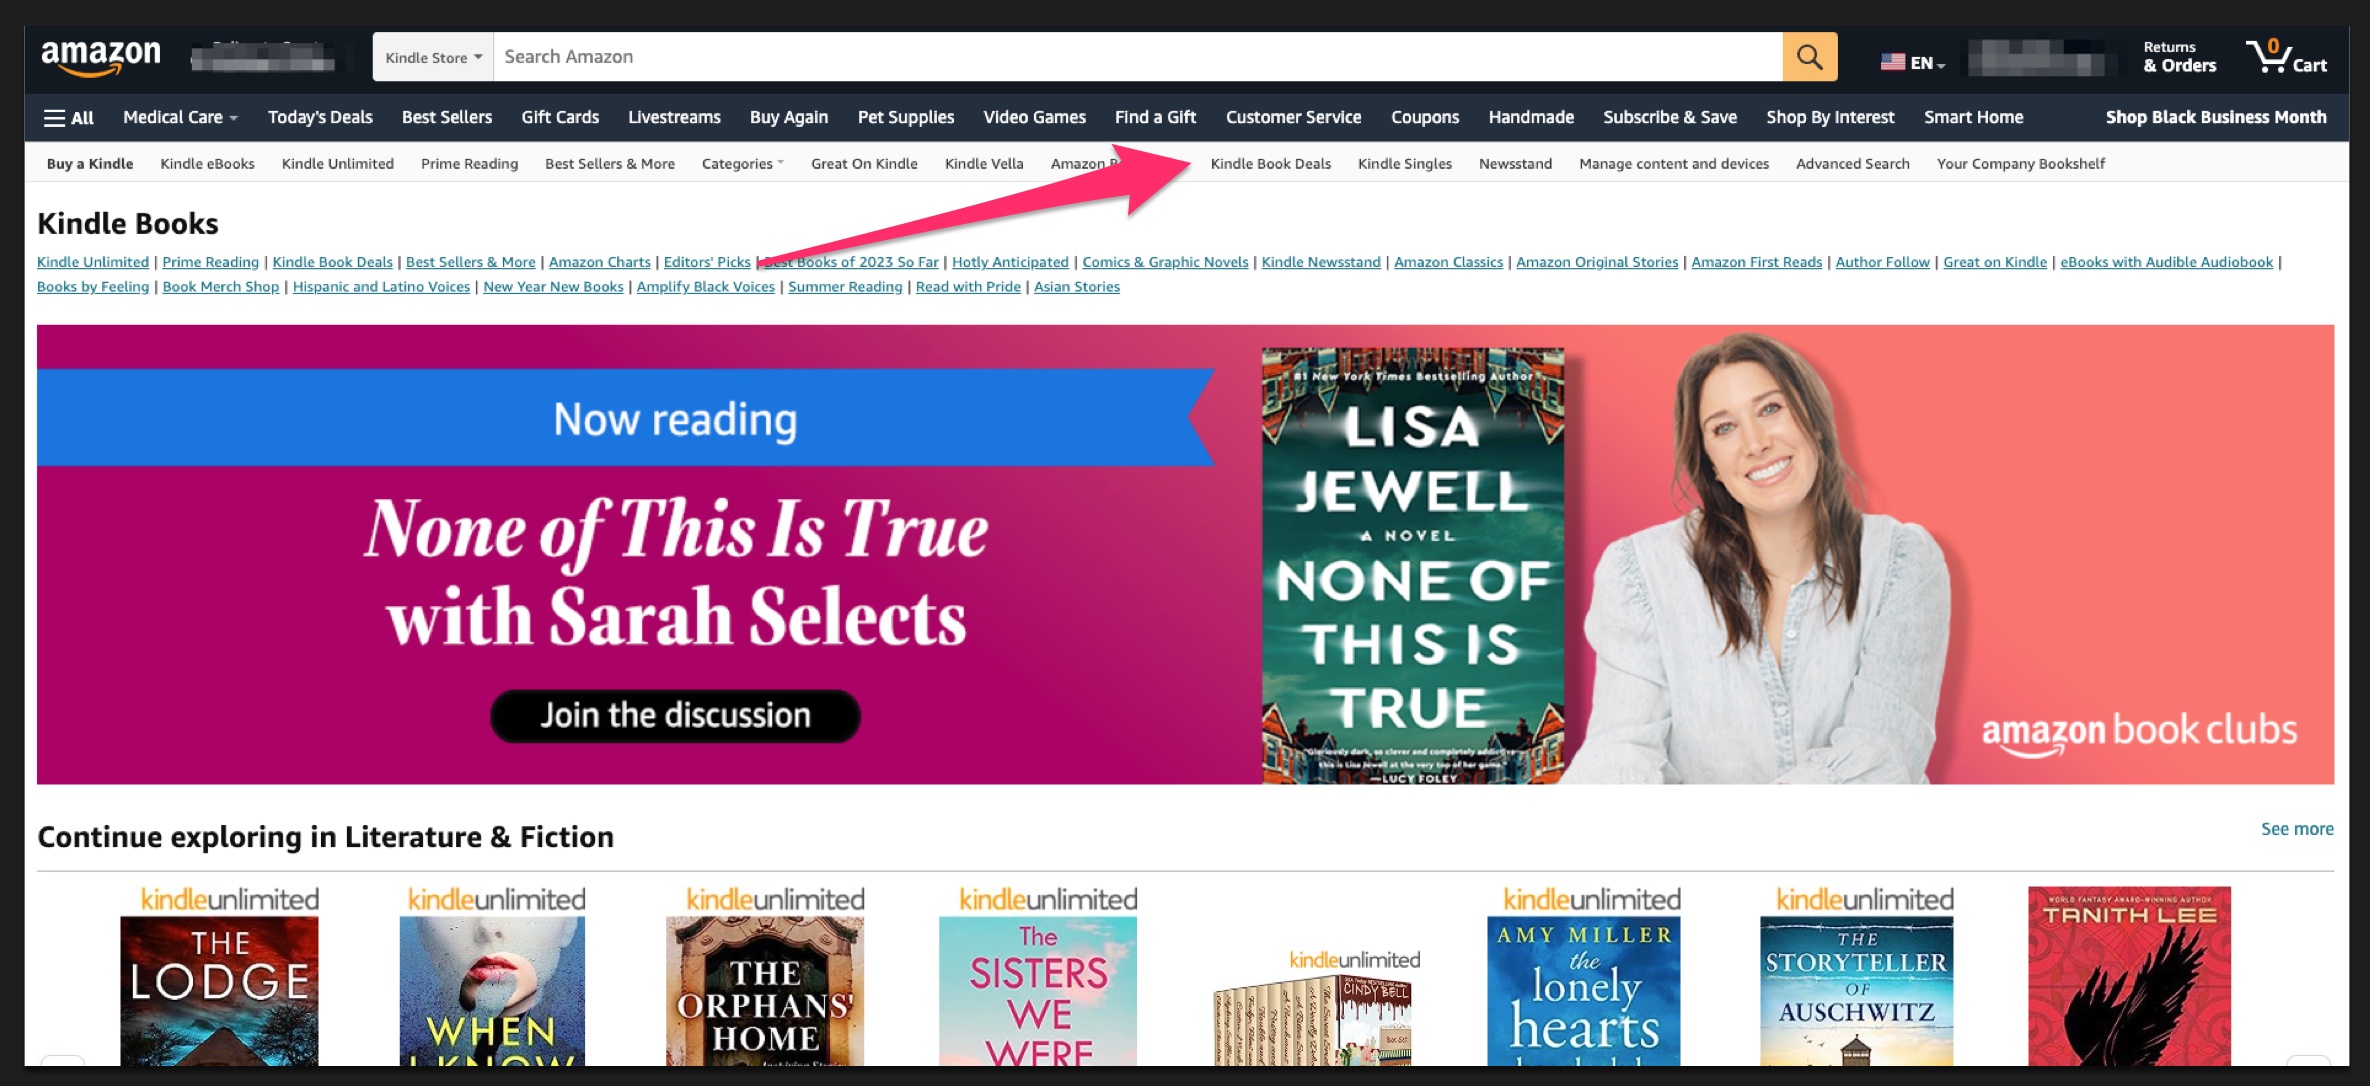 How to Find Kindle Daily Deals for Romance Books - Step 4